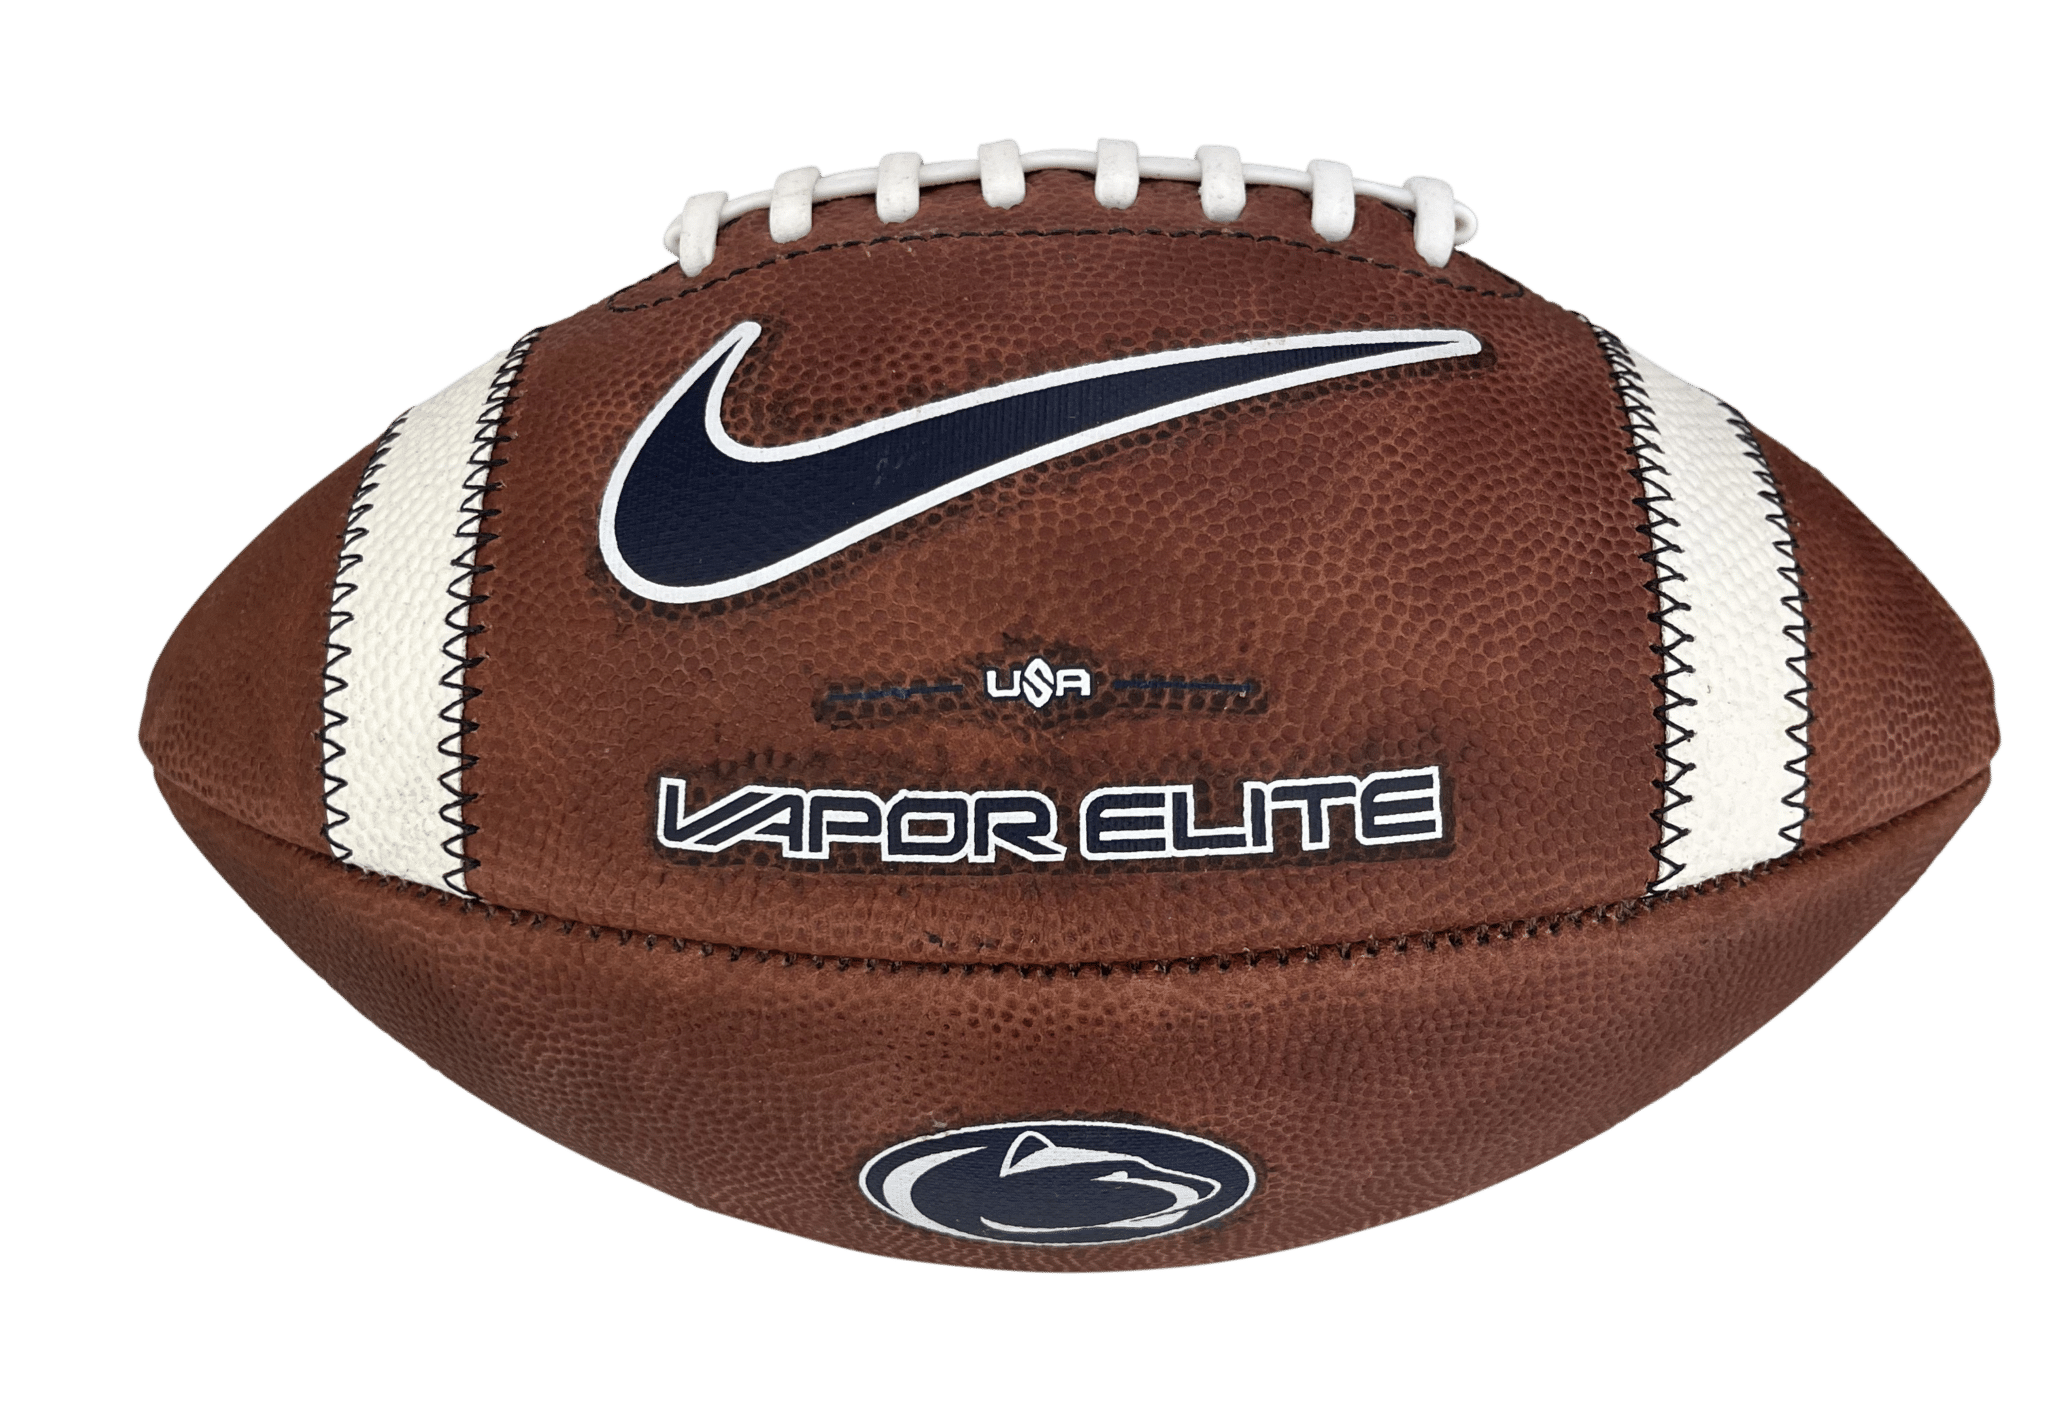 Nike Penn State Nittany Lions Size Leather Football, Brown